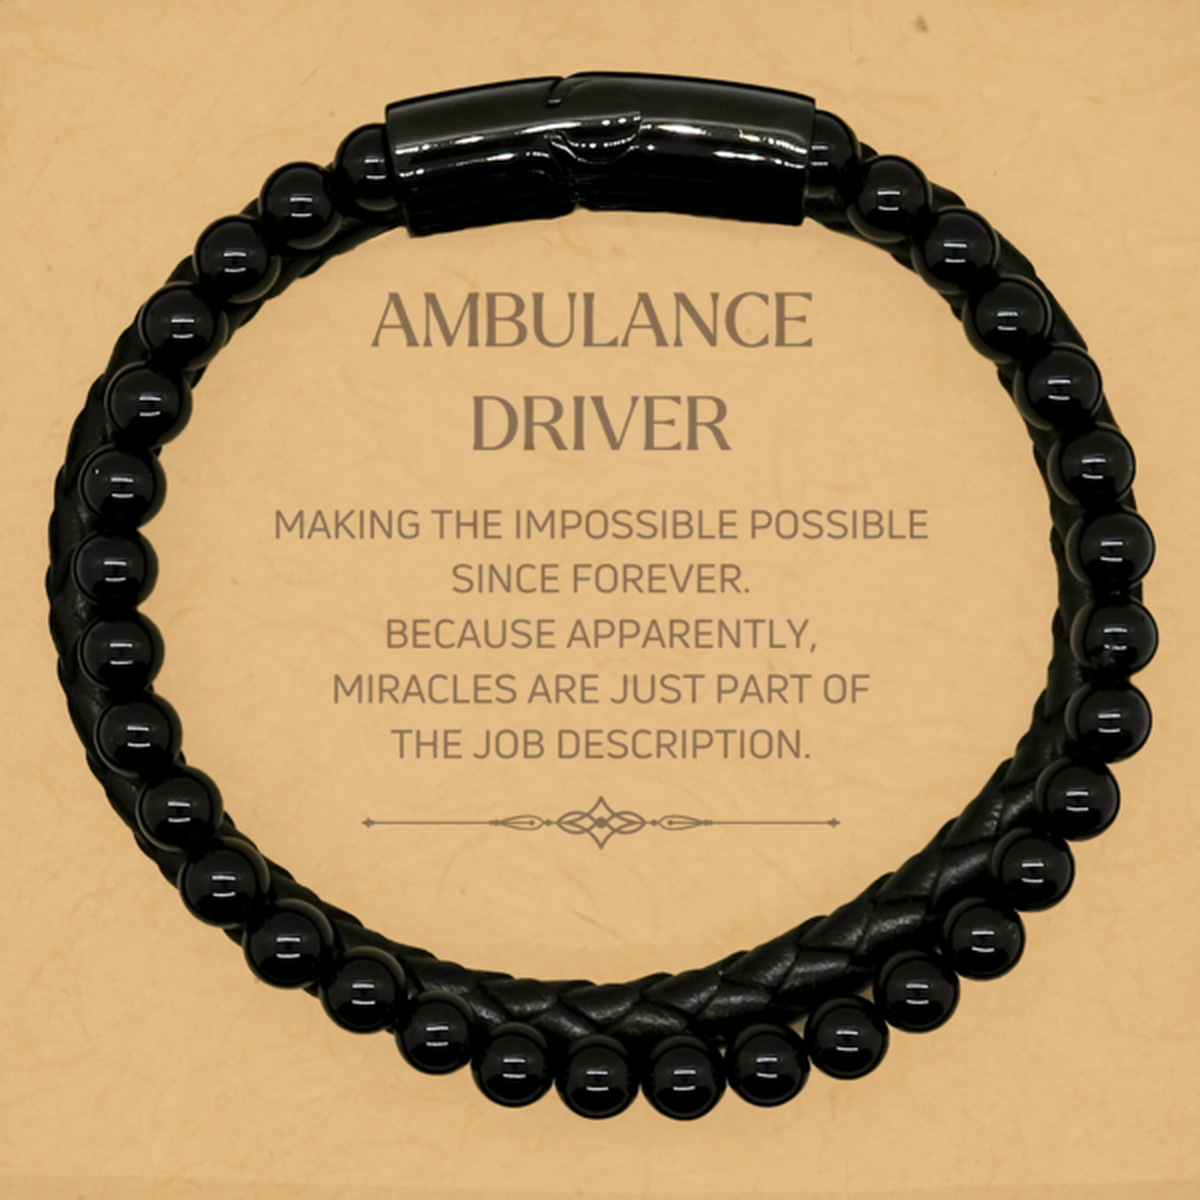 Funny Ambulance Driver Gifts, Miracles are just part of the job description, Inspirational Birthday Stone Leather Bracelets For Ambulance Driver, Men, Women, Coworkers, Friends, Boss